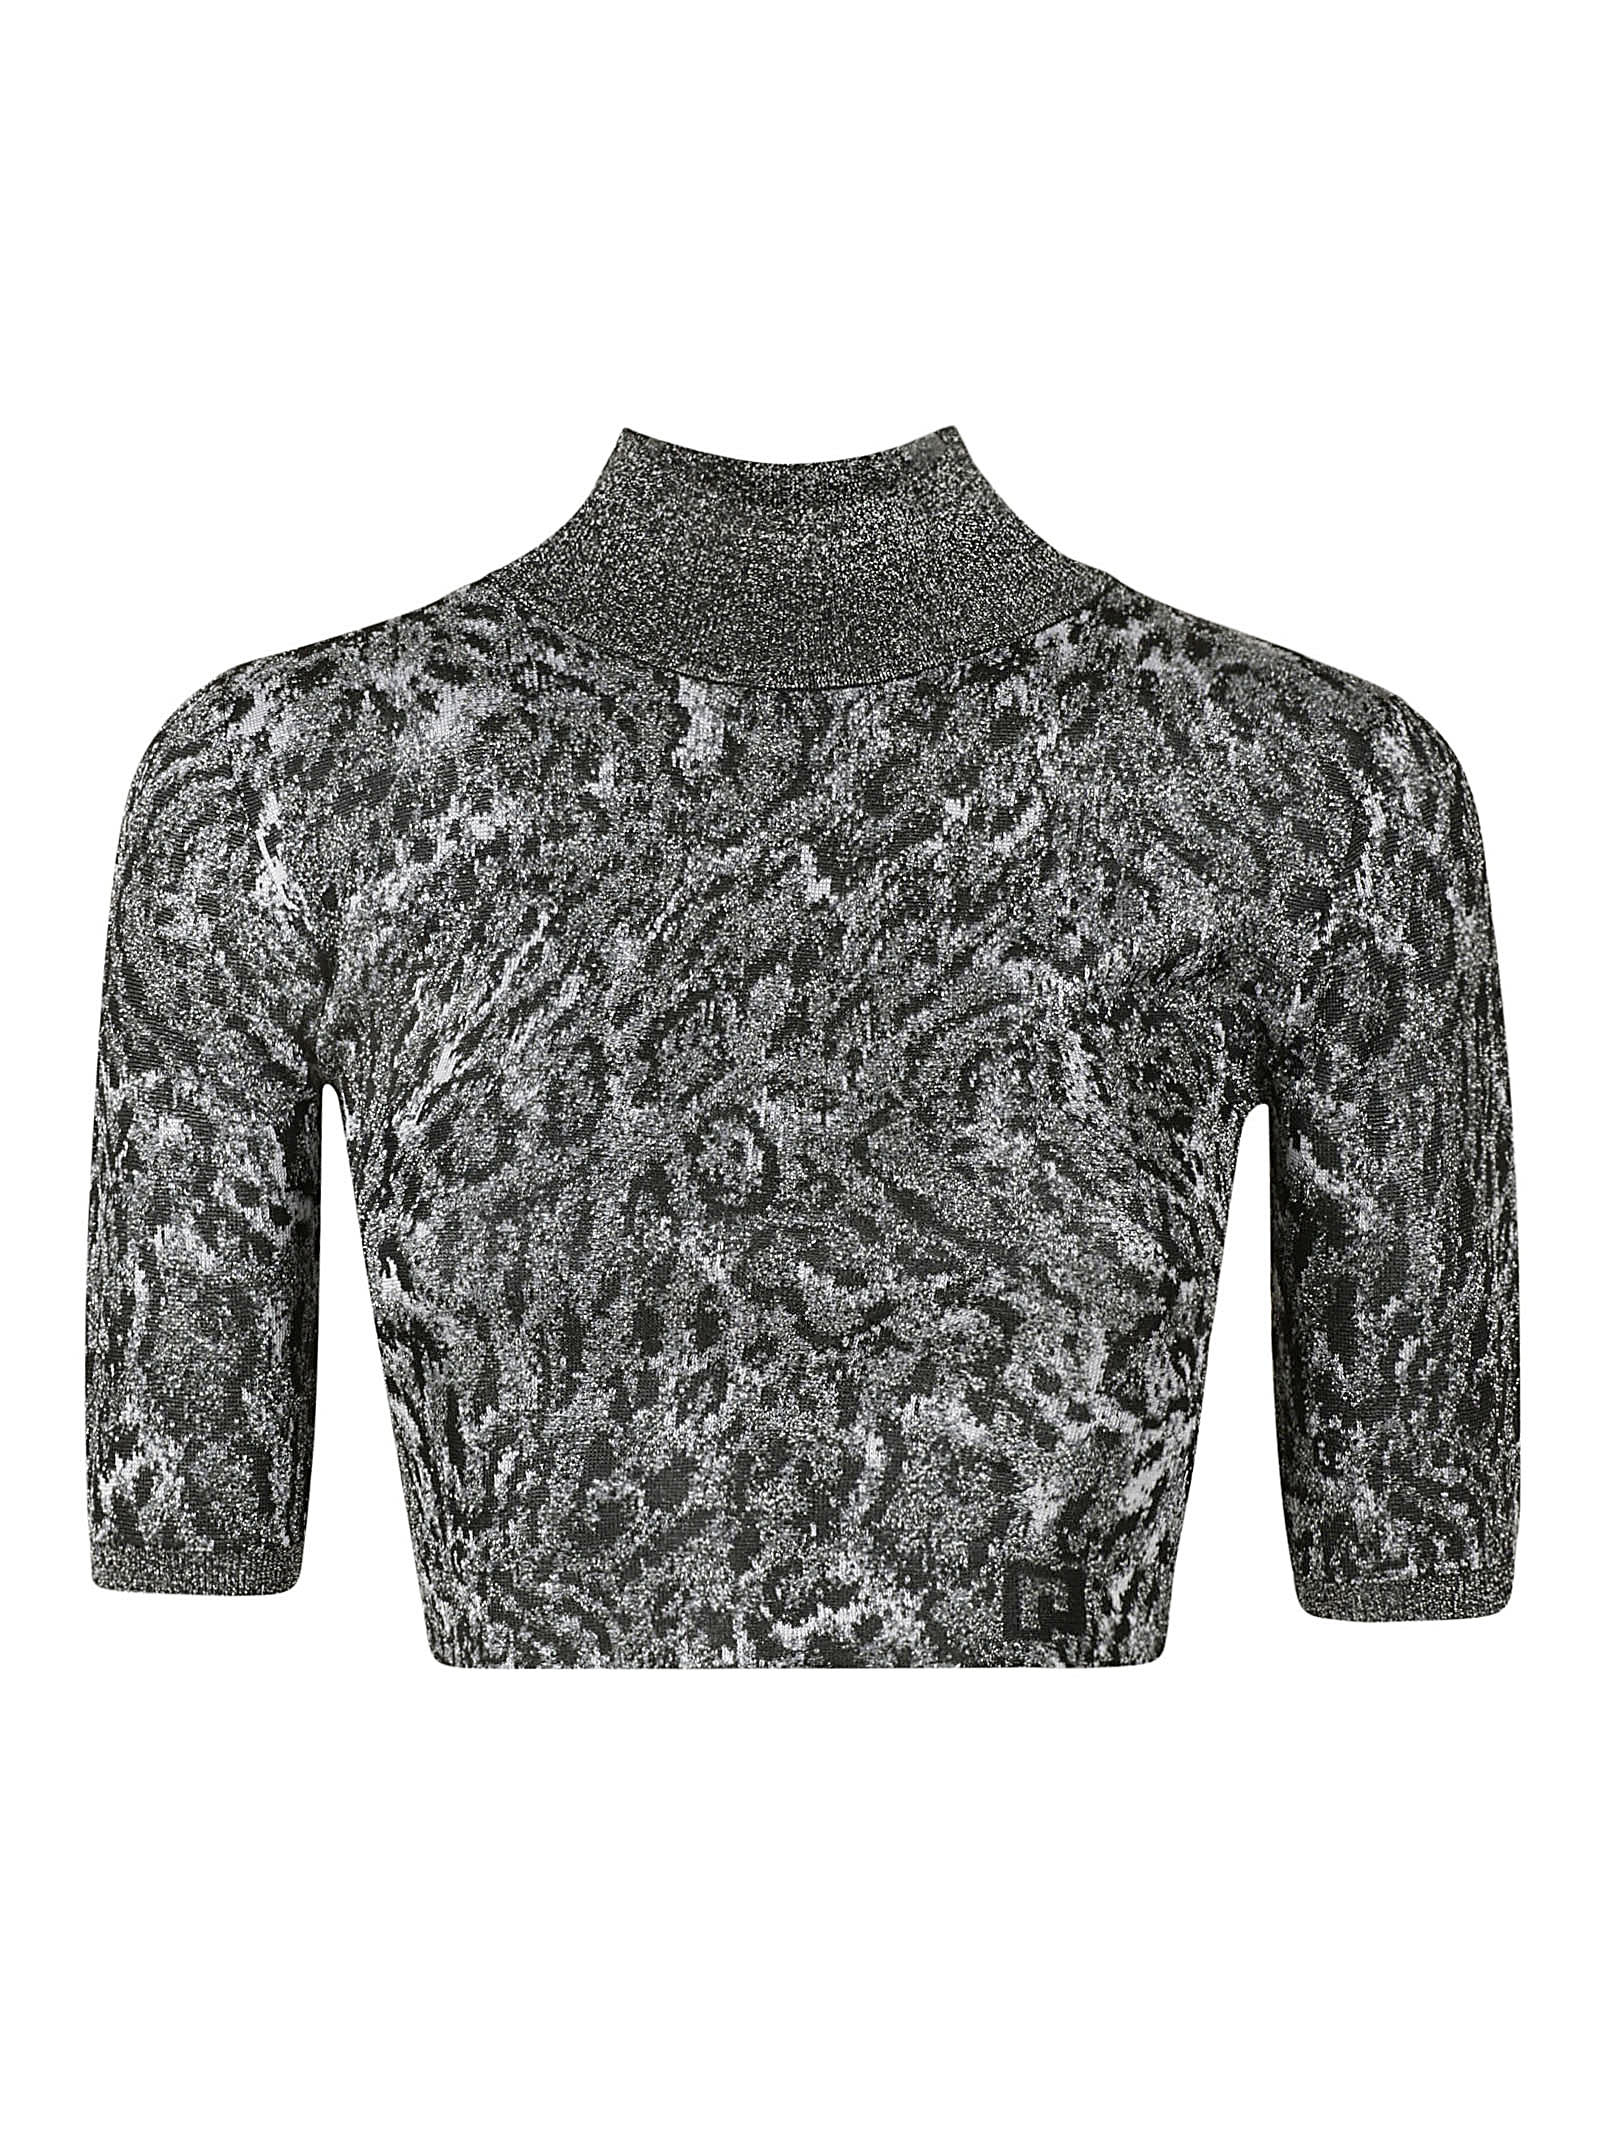 Paco Rabanne Animalier Turtleneck Cropped Top